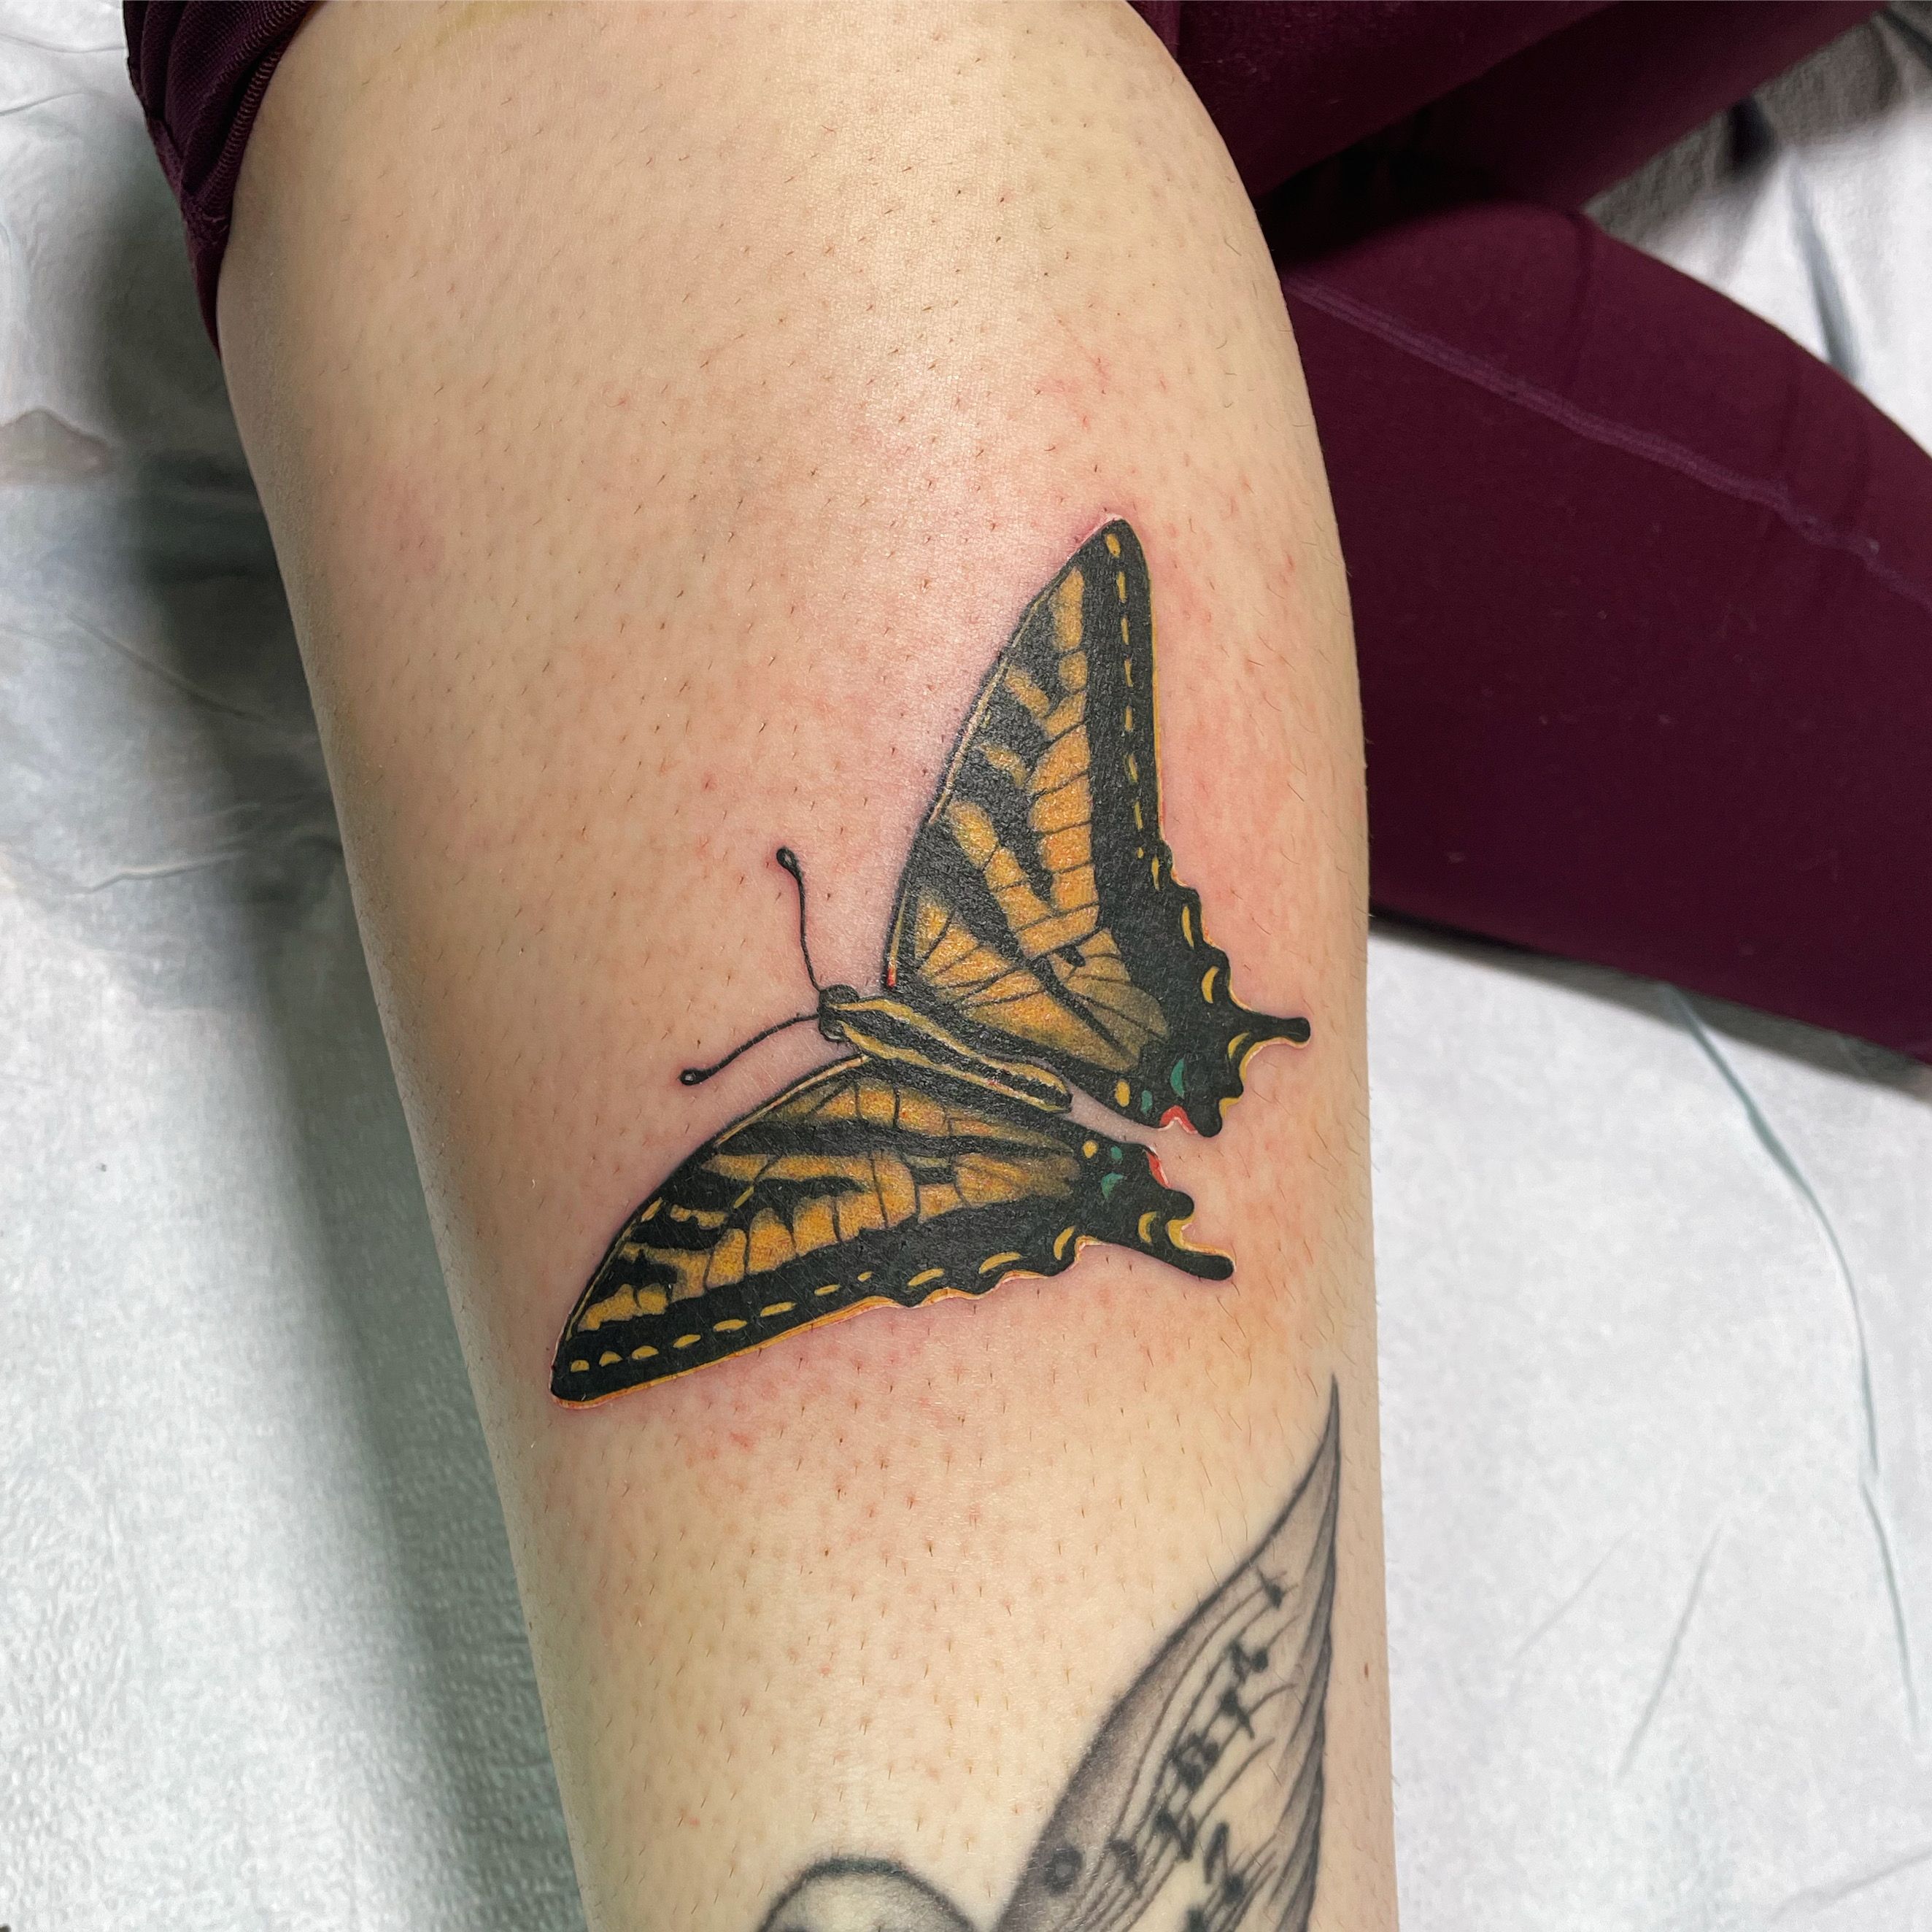 10 Swallowtail Tattoo Ideas in 2021 MeaningsDesignsAnd More